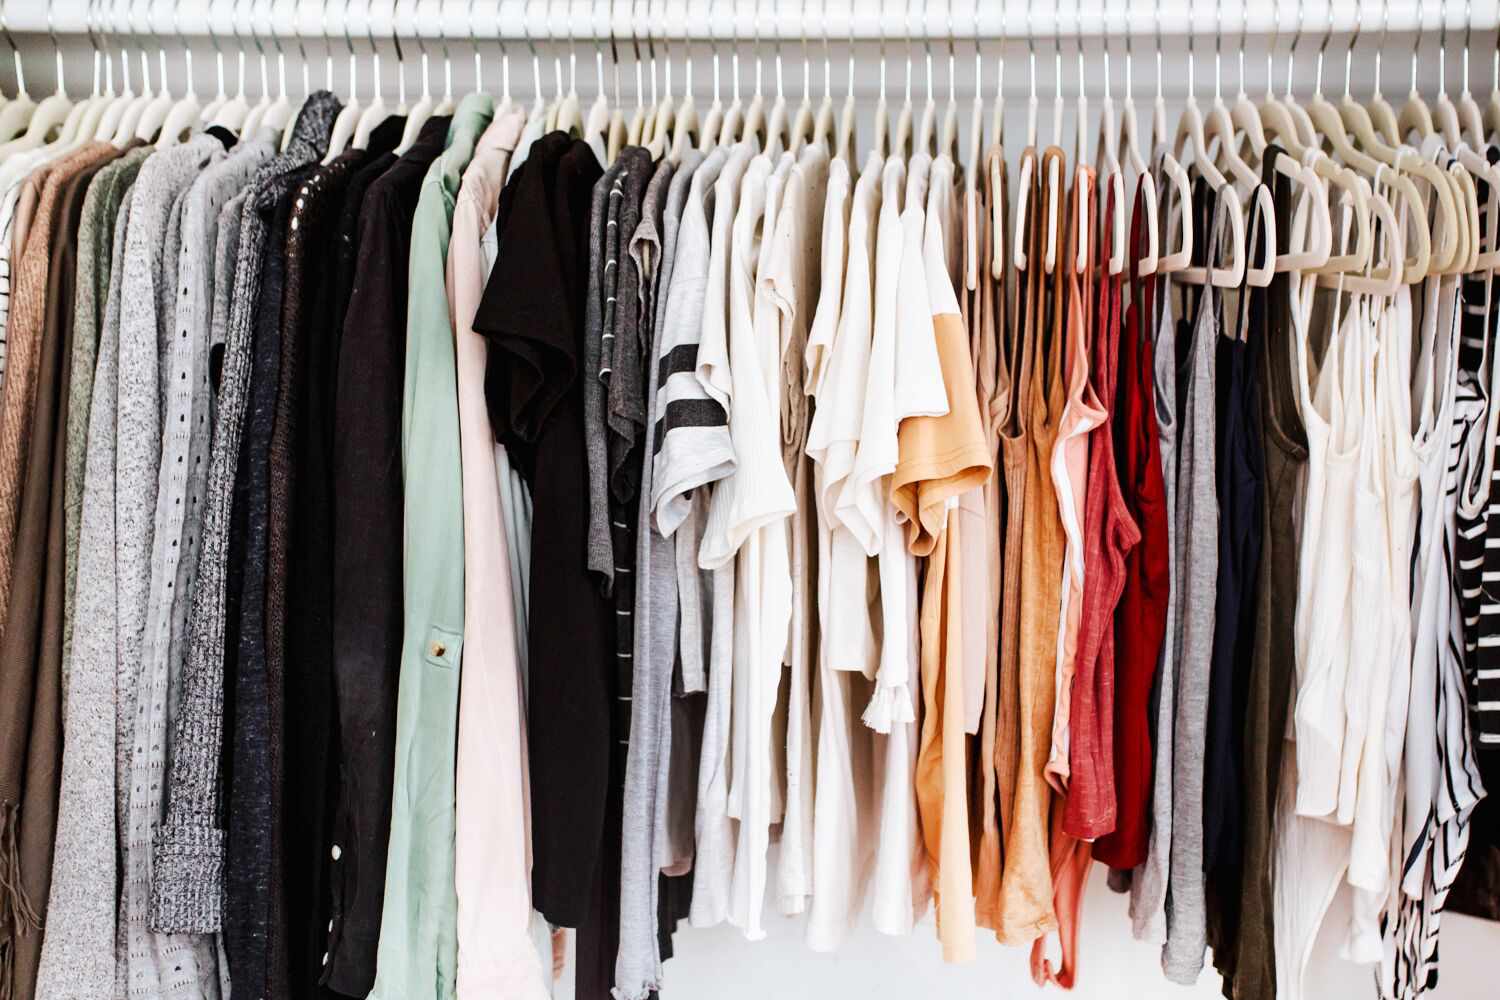 5 ways to repurpose old clothes that you probably never considered